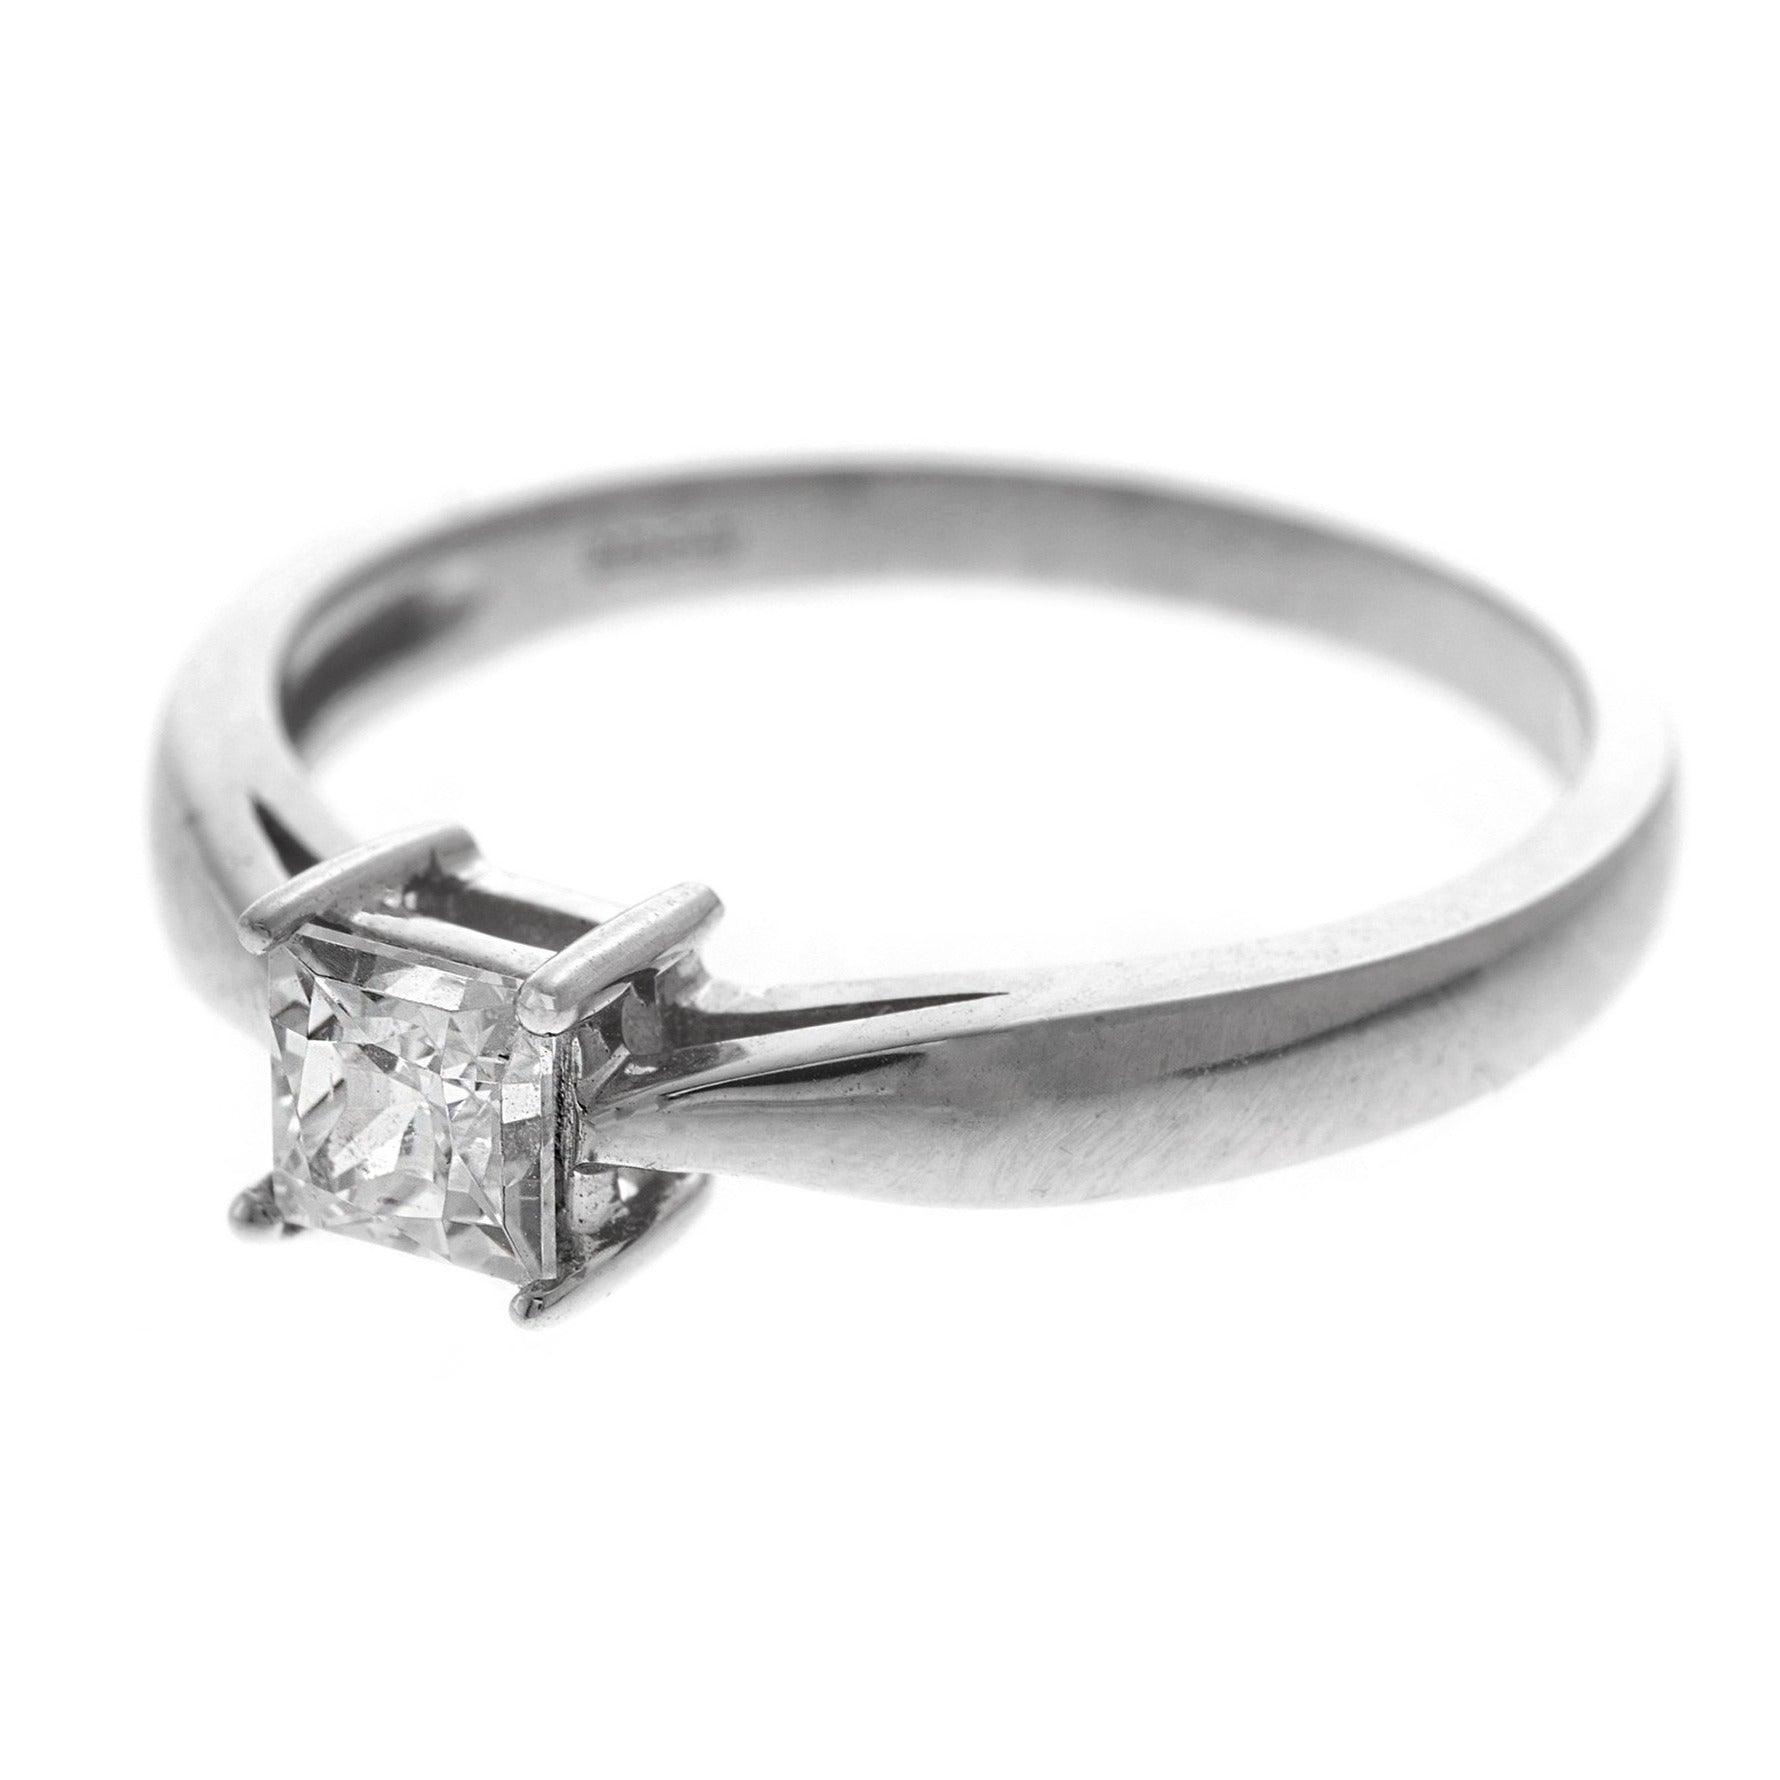 18ct White Gold Cubic Zirconia Engagement Ring (2.23g) LR9012 - Minar Jewellers